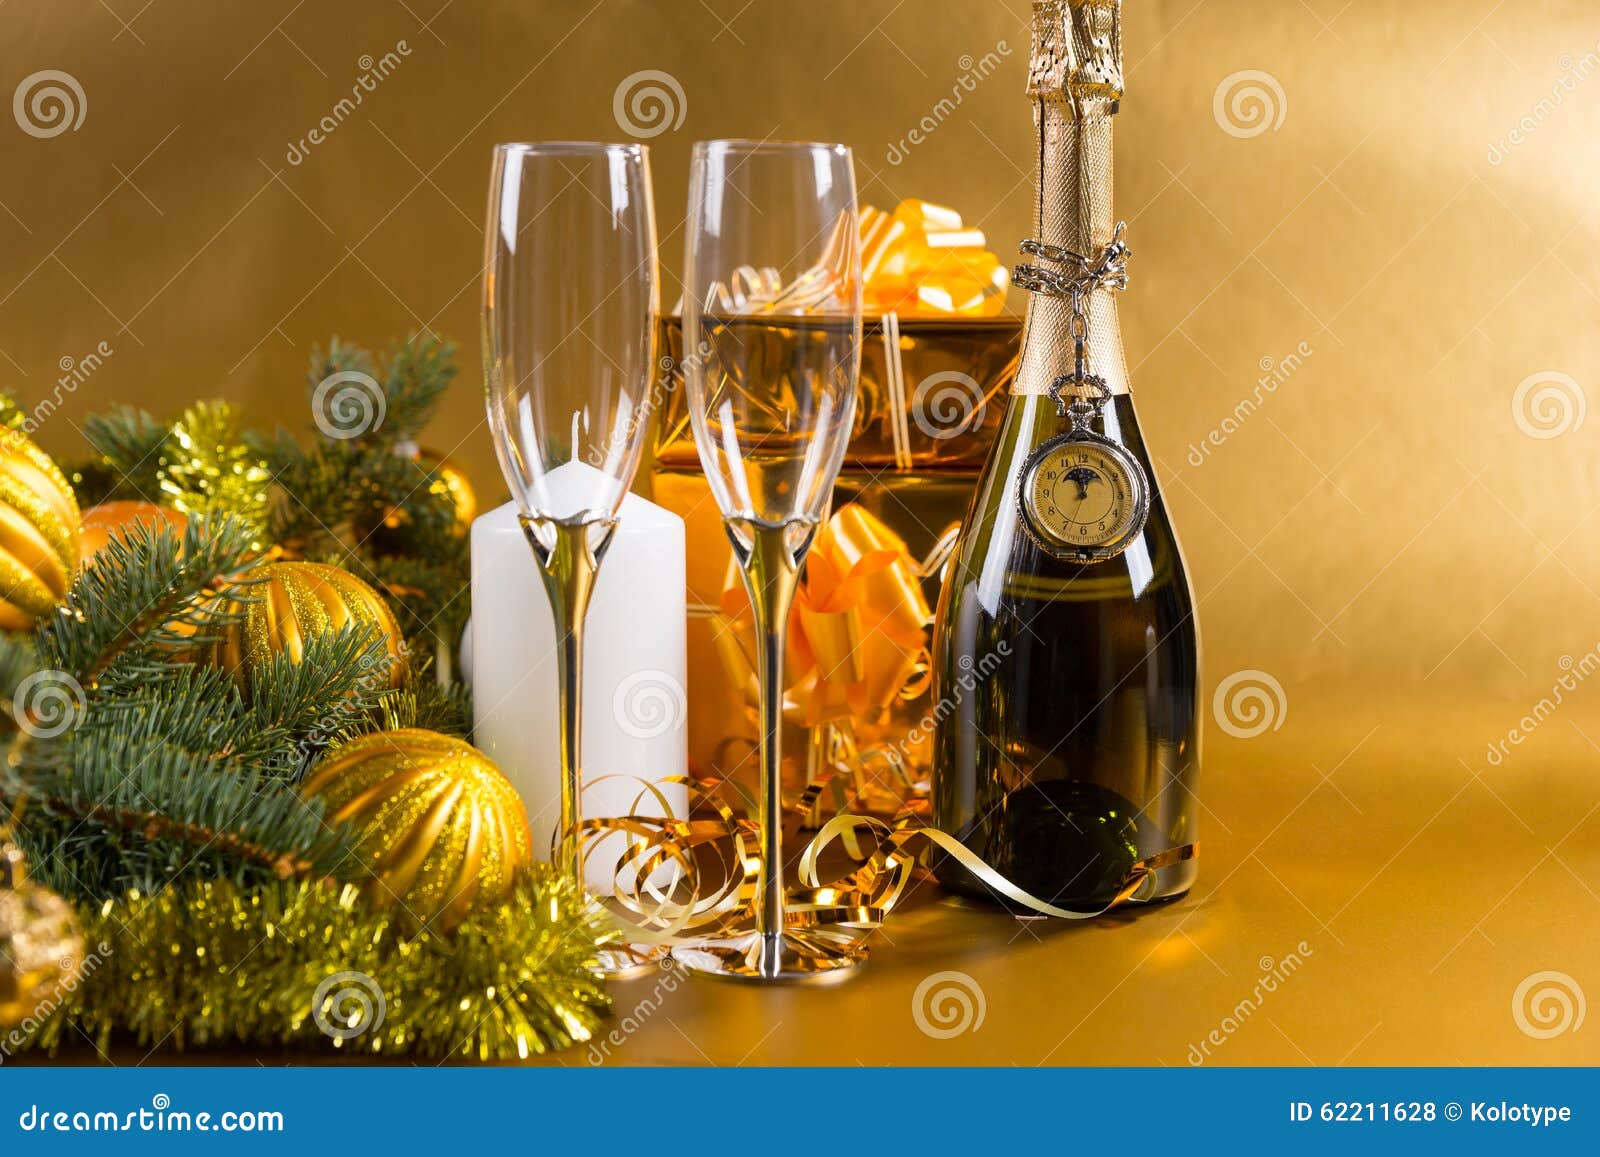 Festive Bottle of Champagne with Glasses and Gifts Stock Photo - Image ...